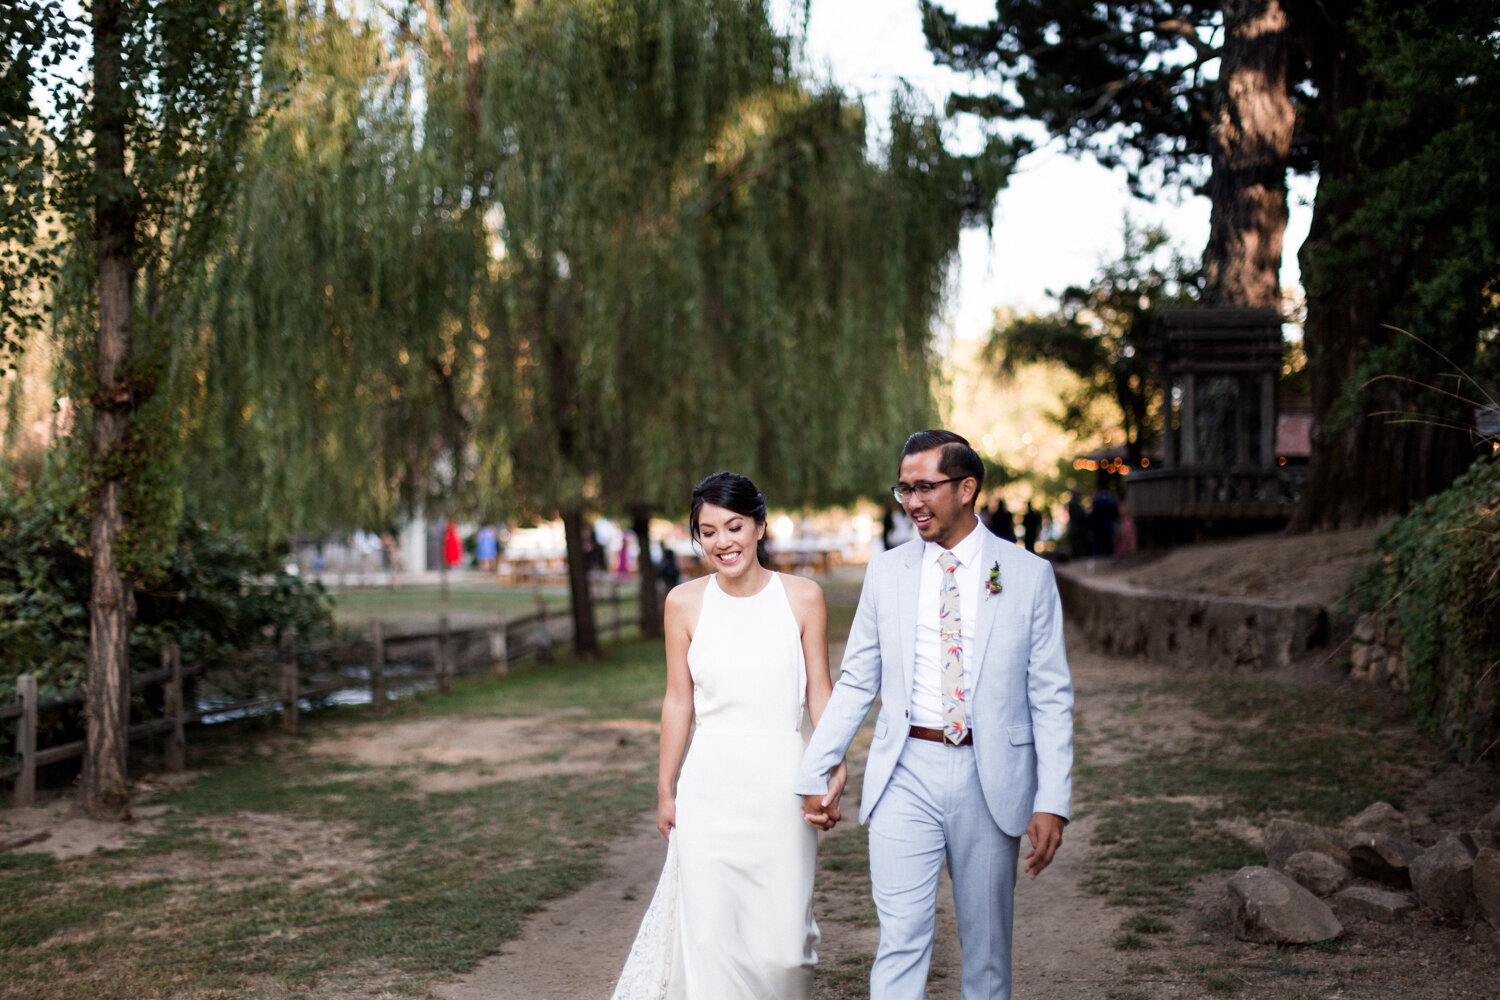 Bride and Groom at Radonich Ranch in the Santa Cruz Mountains in Northern California by Danielle Motif Photography